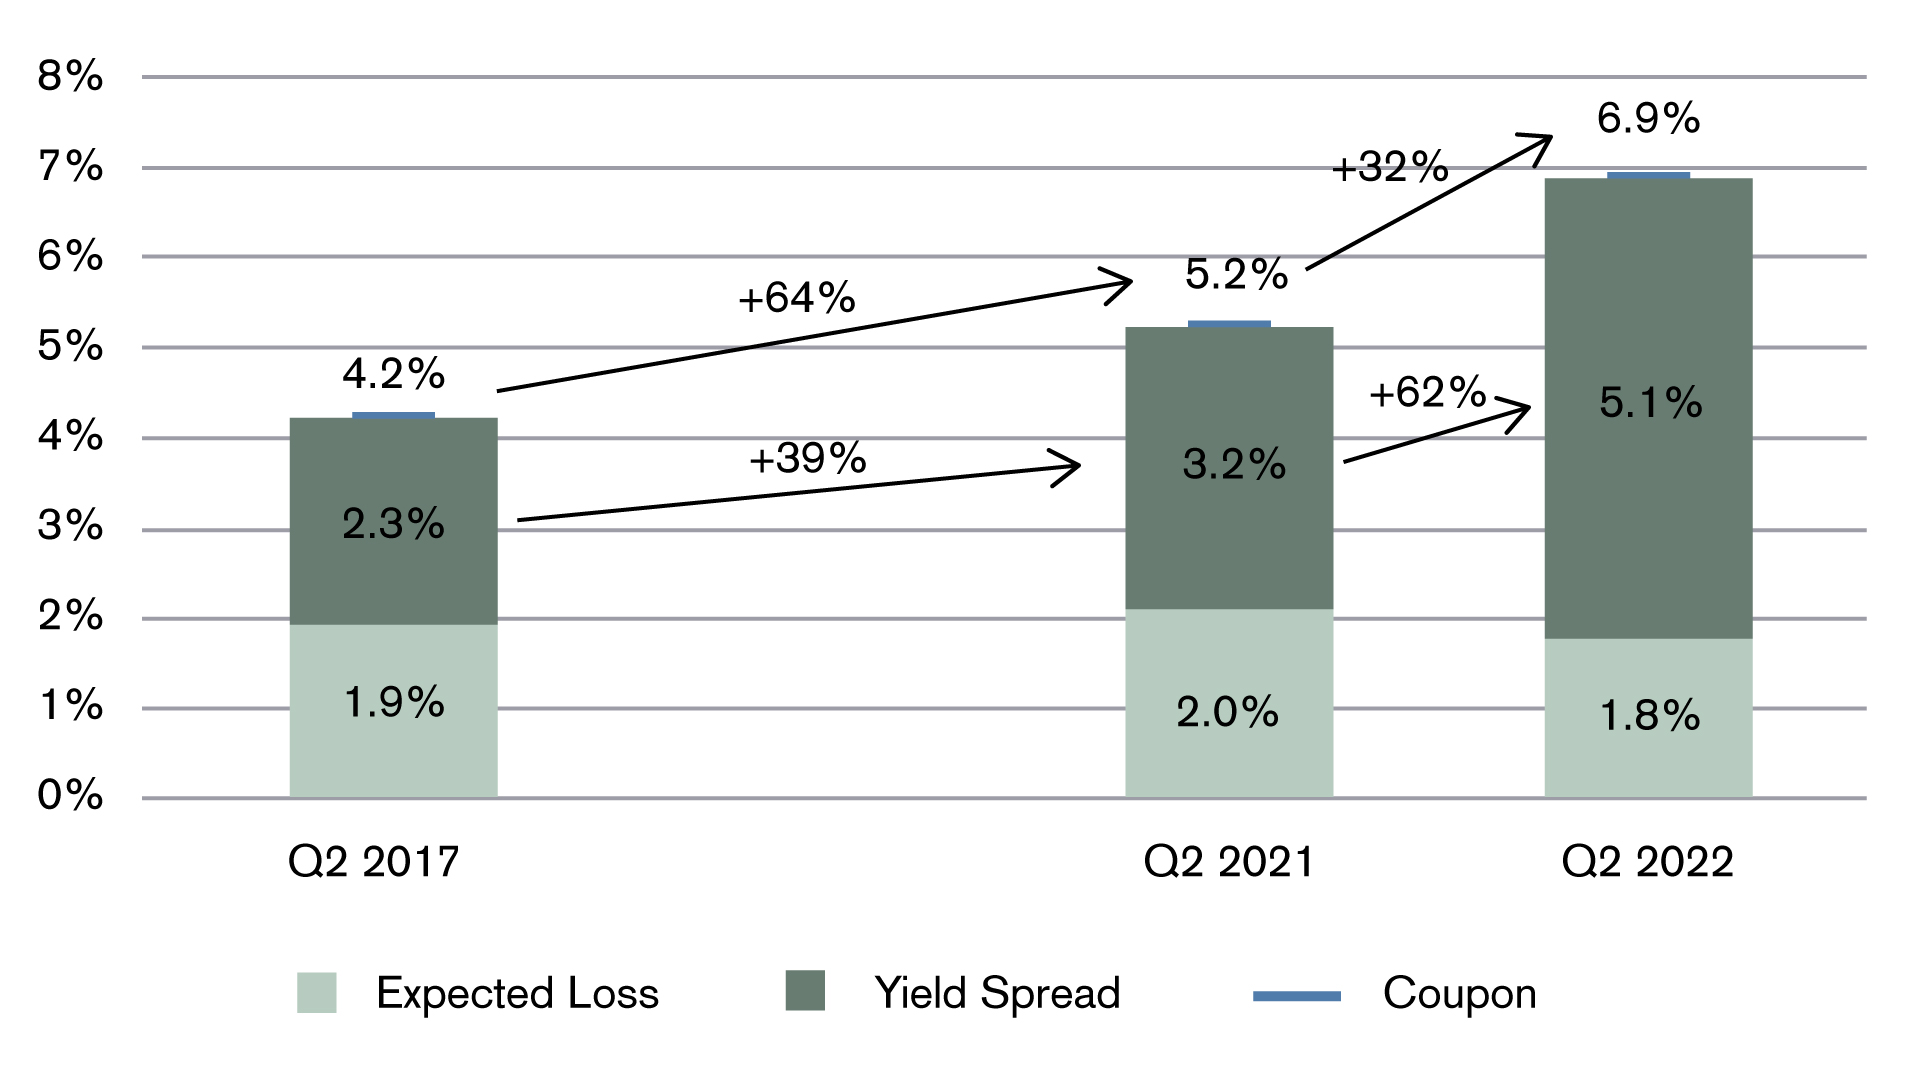 Comparison of the expected loss, yield spread and coupon of Cat Bonds at issuance in Q2 2017 vs. Q2 2021 and 2022